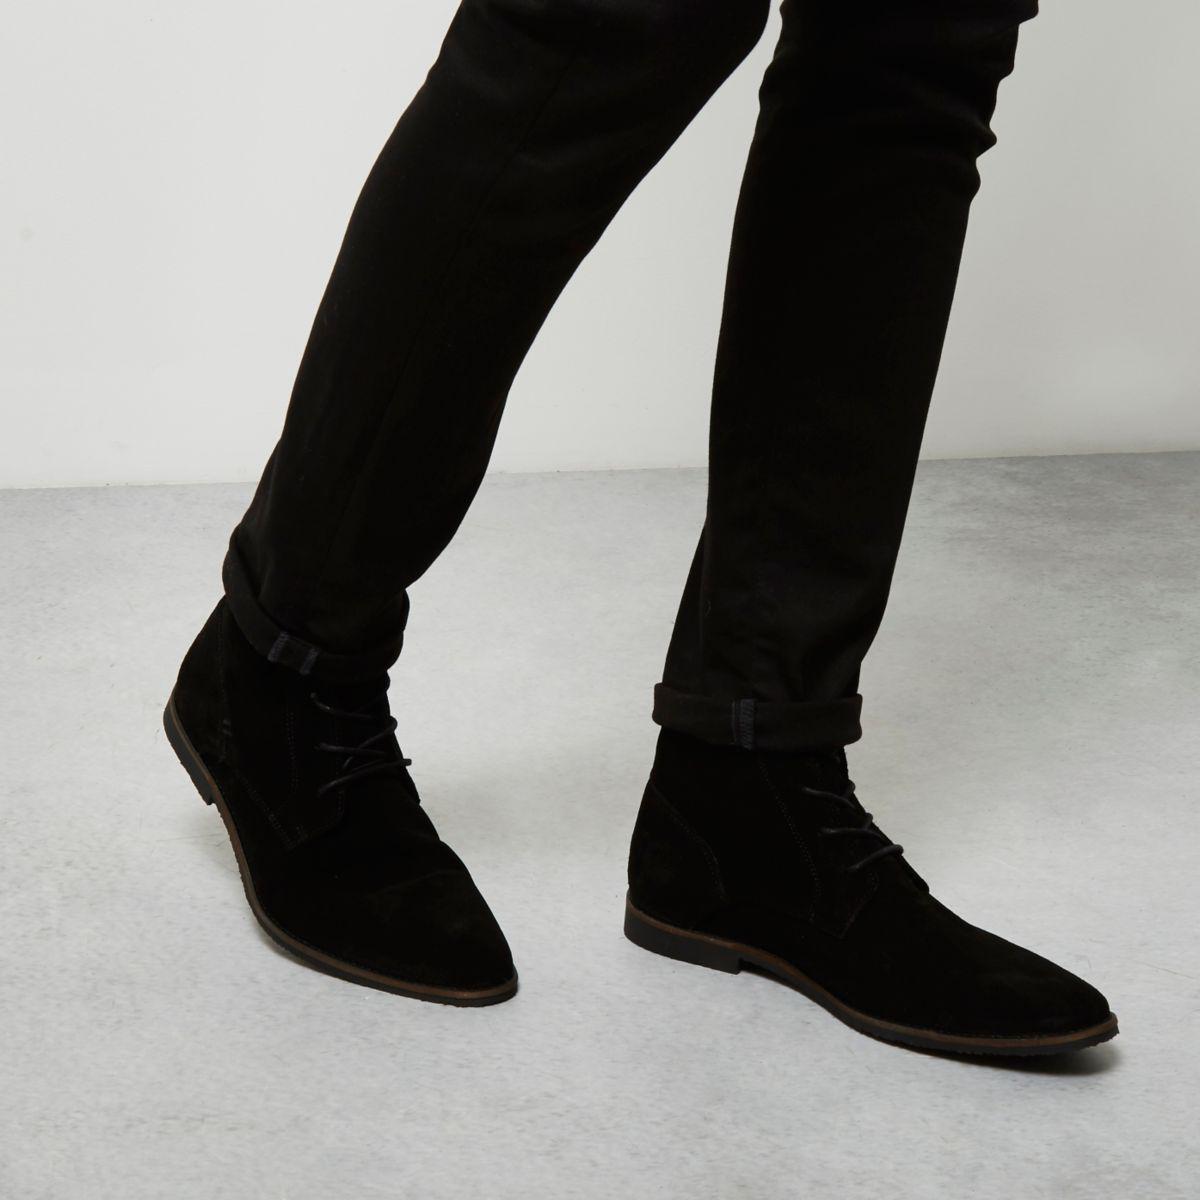 River Island Black Suede Pointed Desert Boots for Men - Lyst